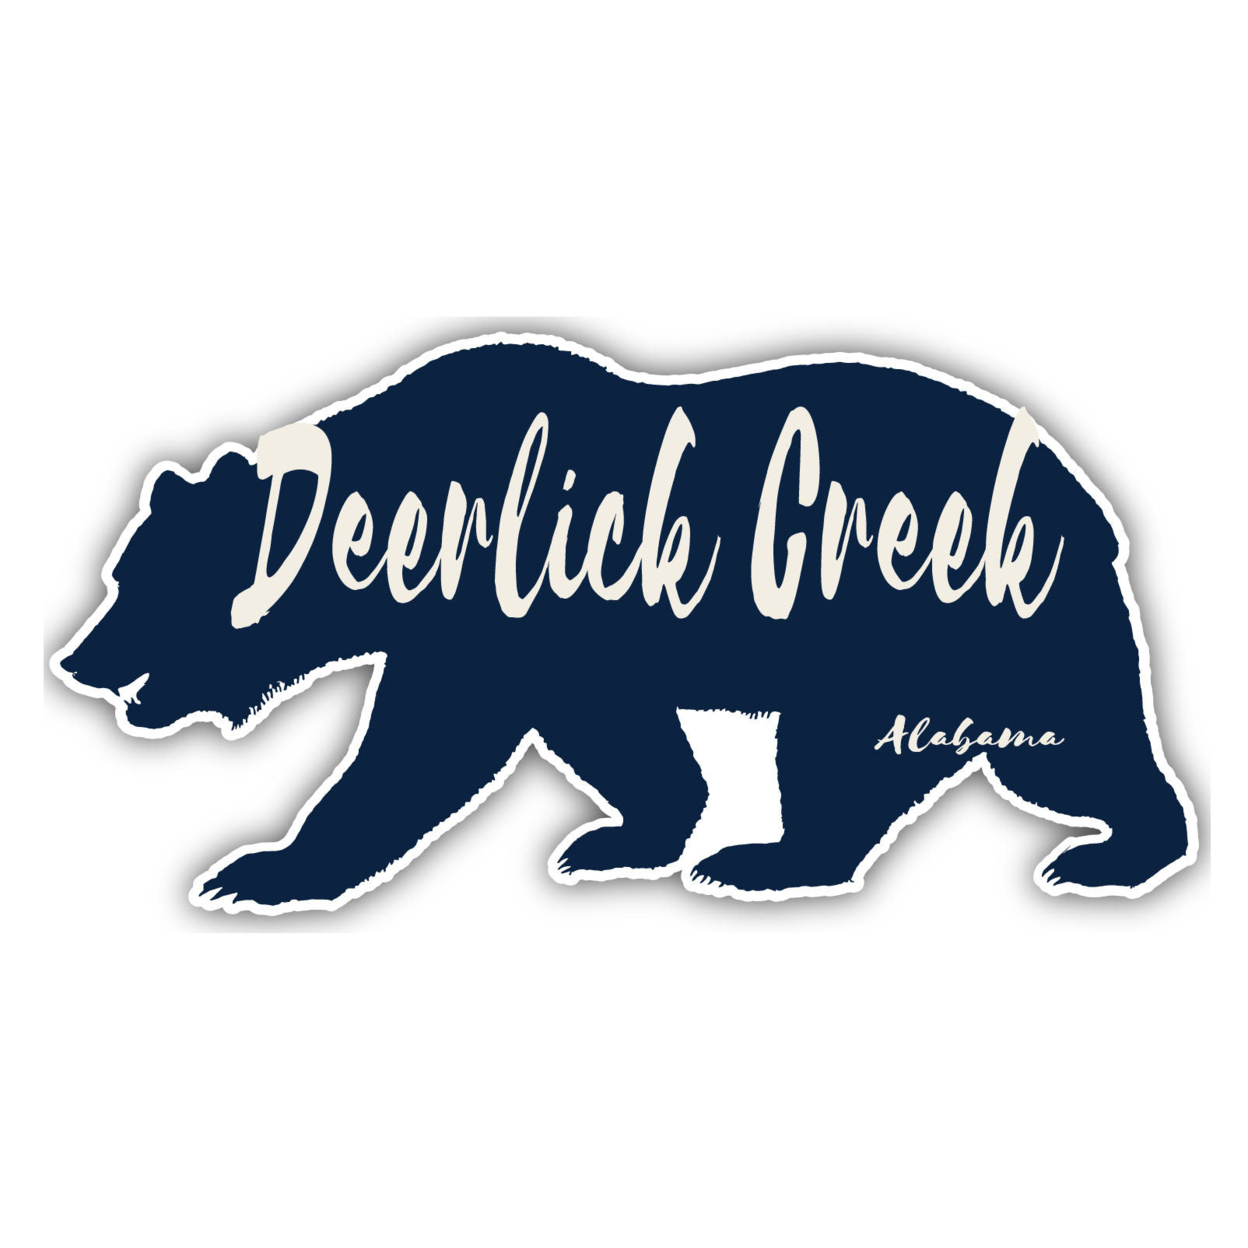 Deerlick Creek Alabama Souvenir Decorative Stickers (Choose Theme And Size) - 4-Pack, 2-Inch, Tent